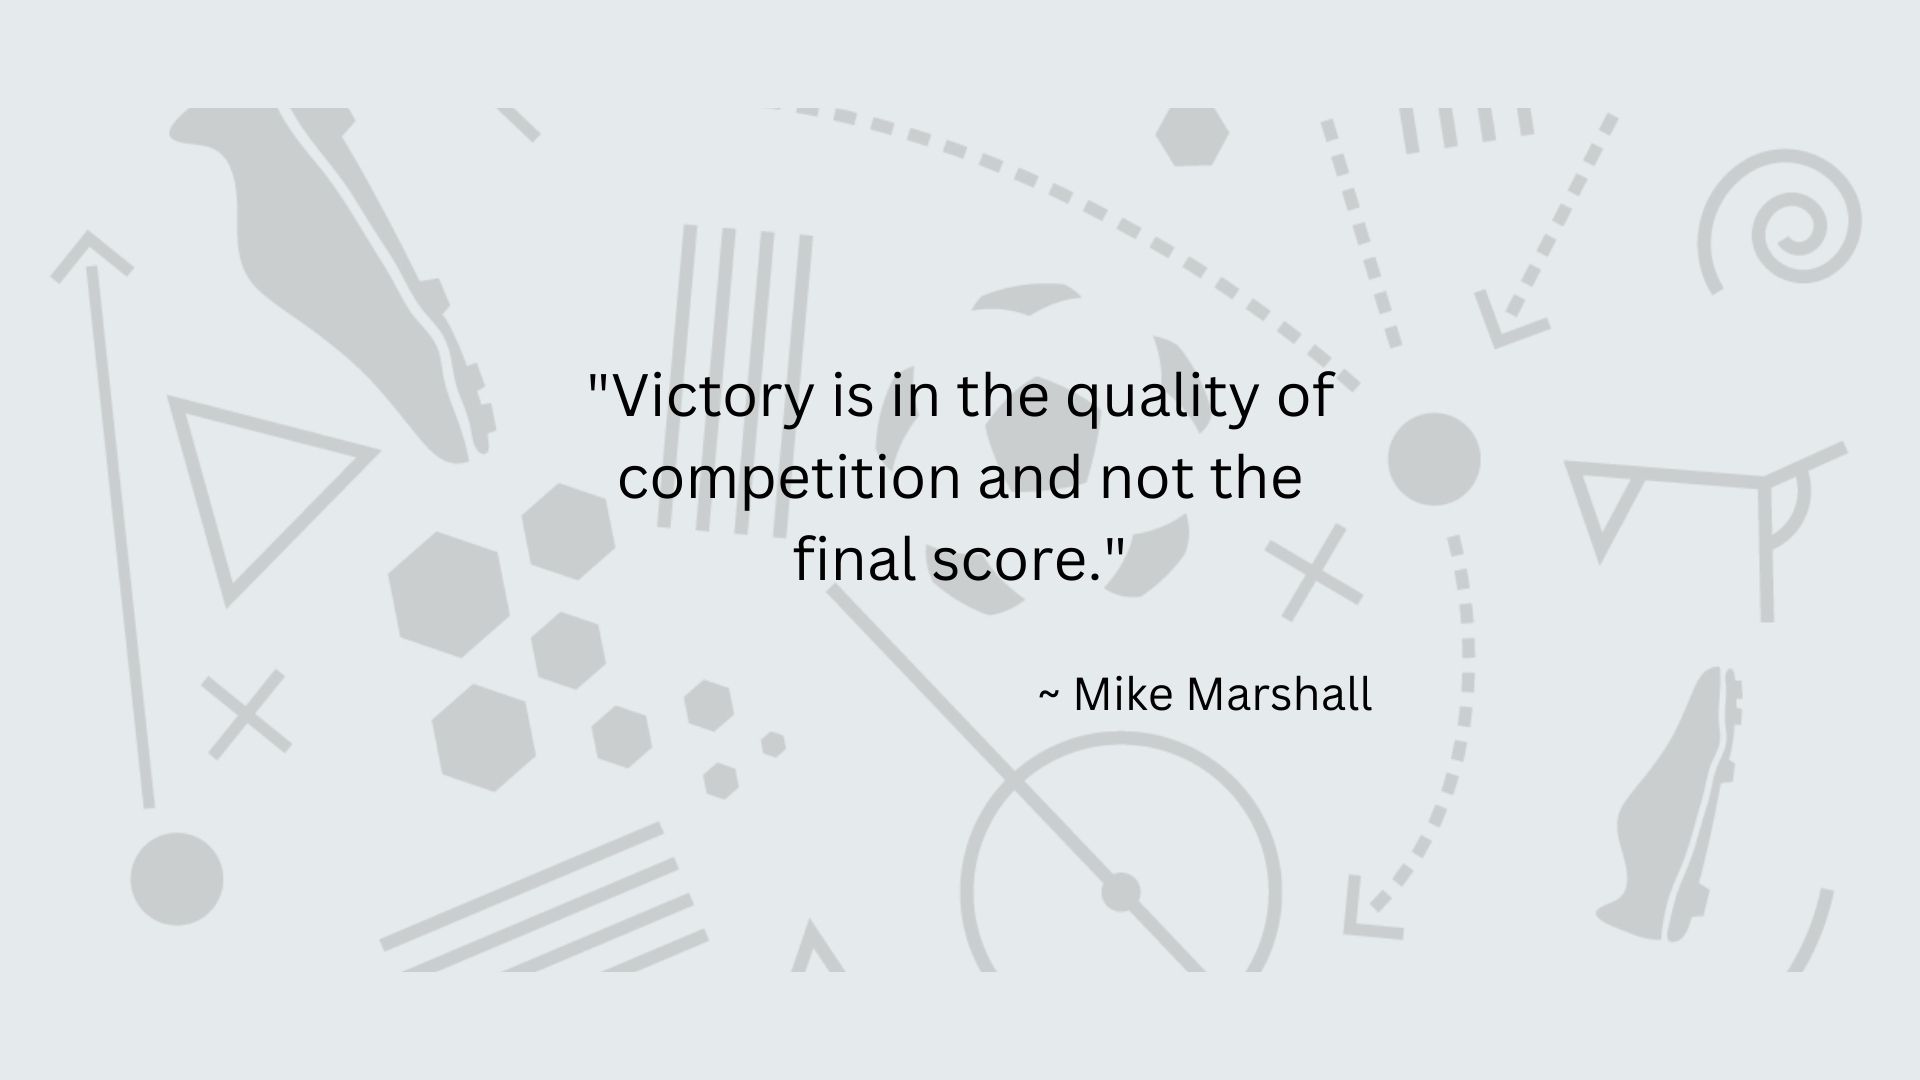 Quote from Mike Marshall: Victory is in the quality of competition and not the final score.